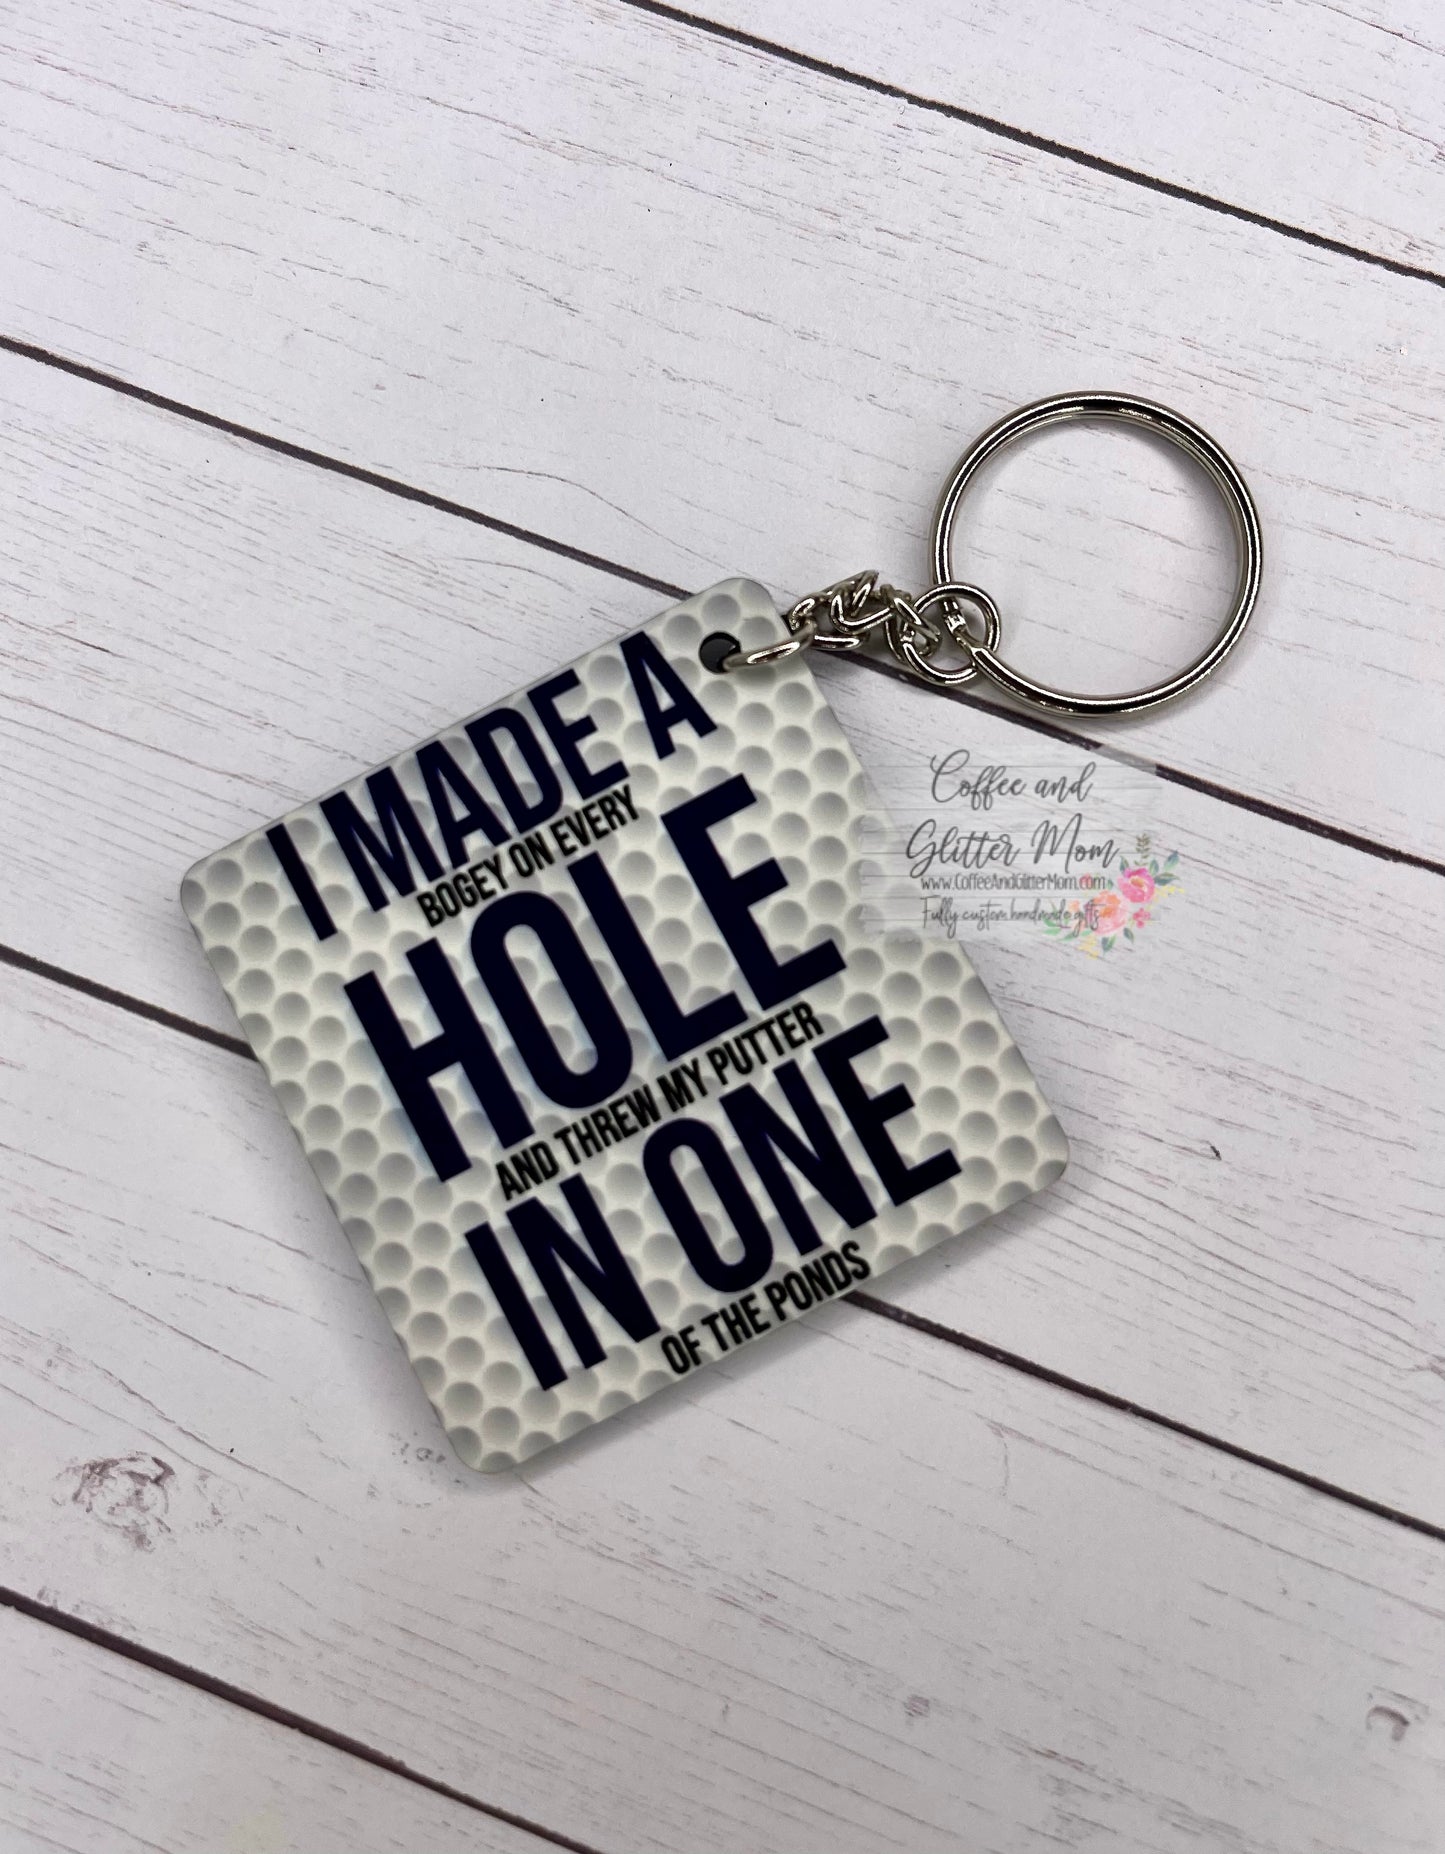 Made A Hole In One...ish Keychain